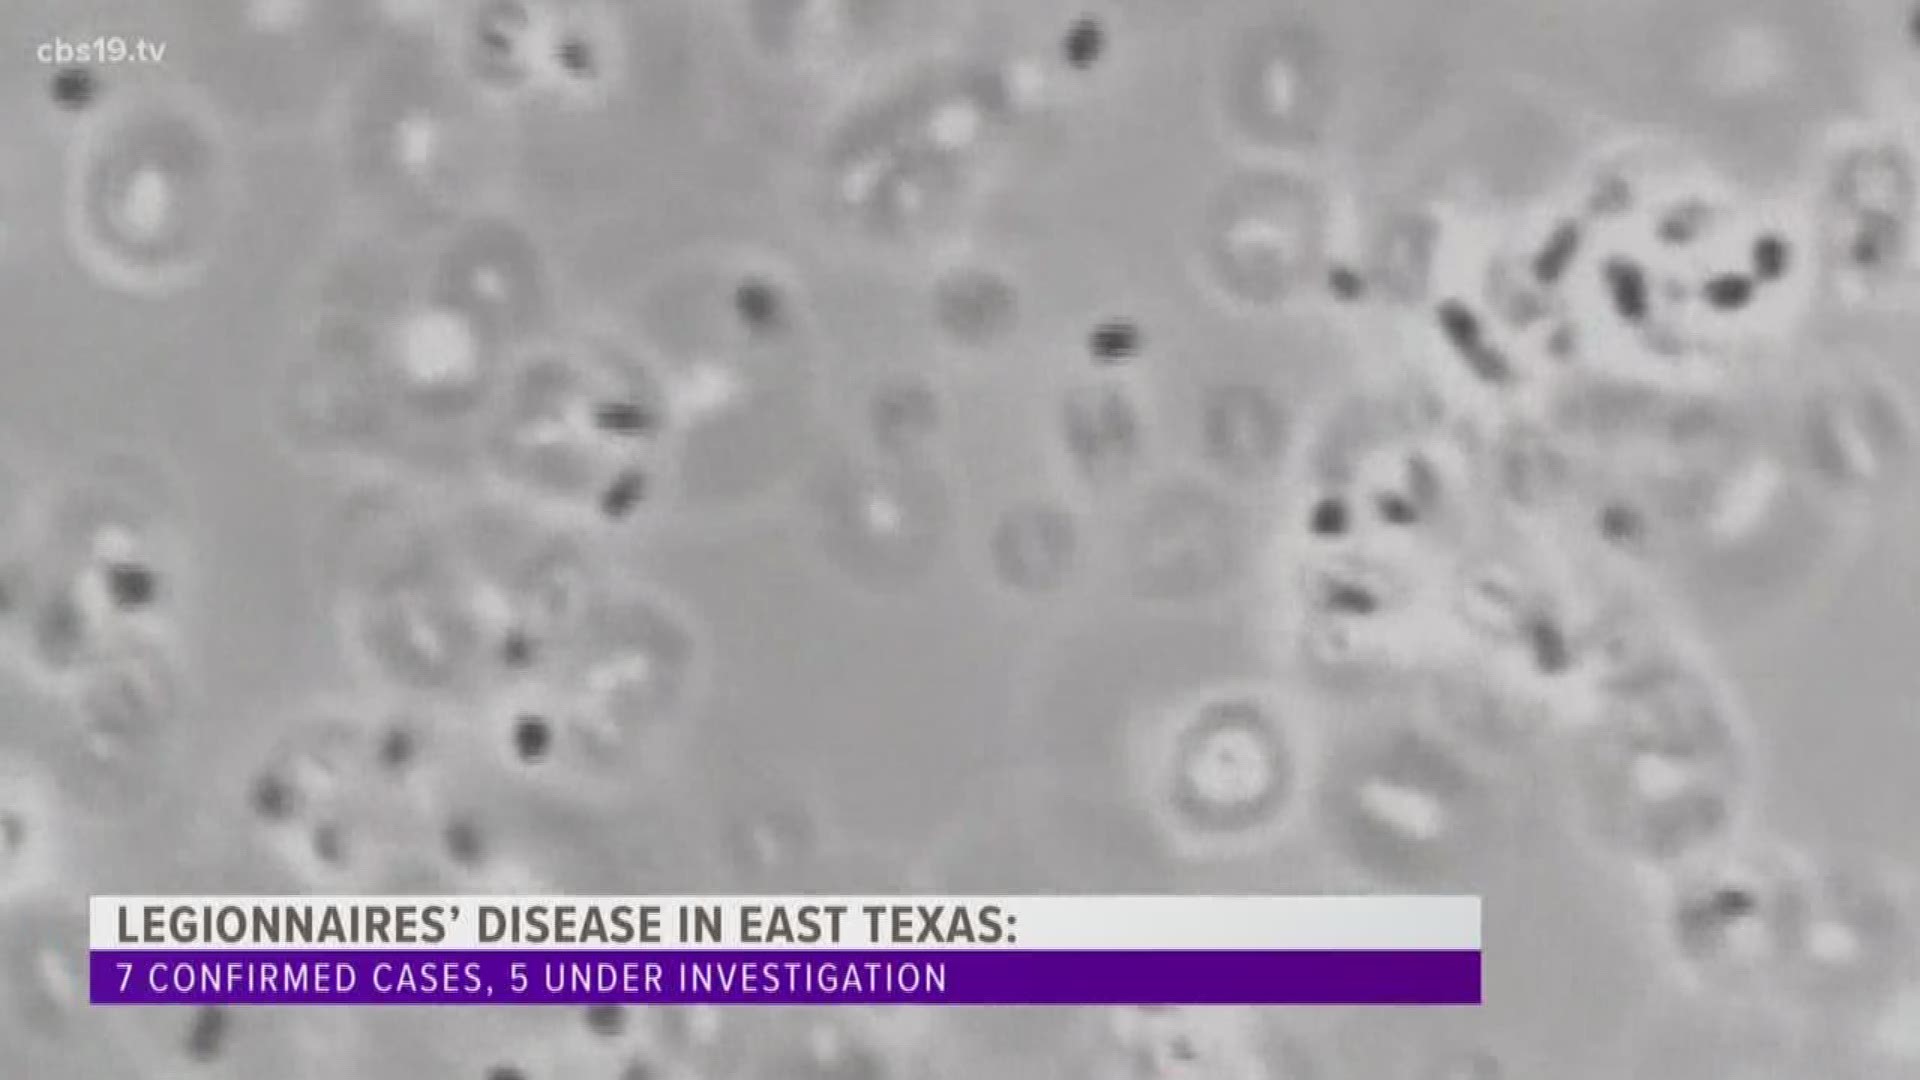 Anyone who attended the East Texas State Fair this year and is sick due to symptoms of the disease is urged to discuss the disease with their health care provider.